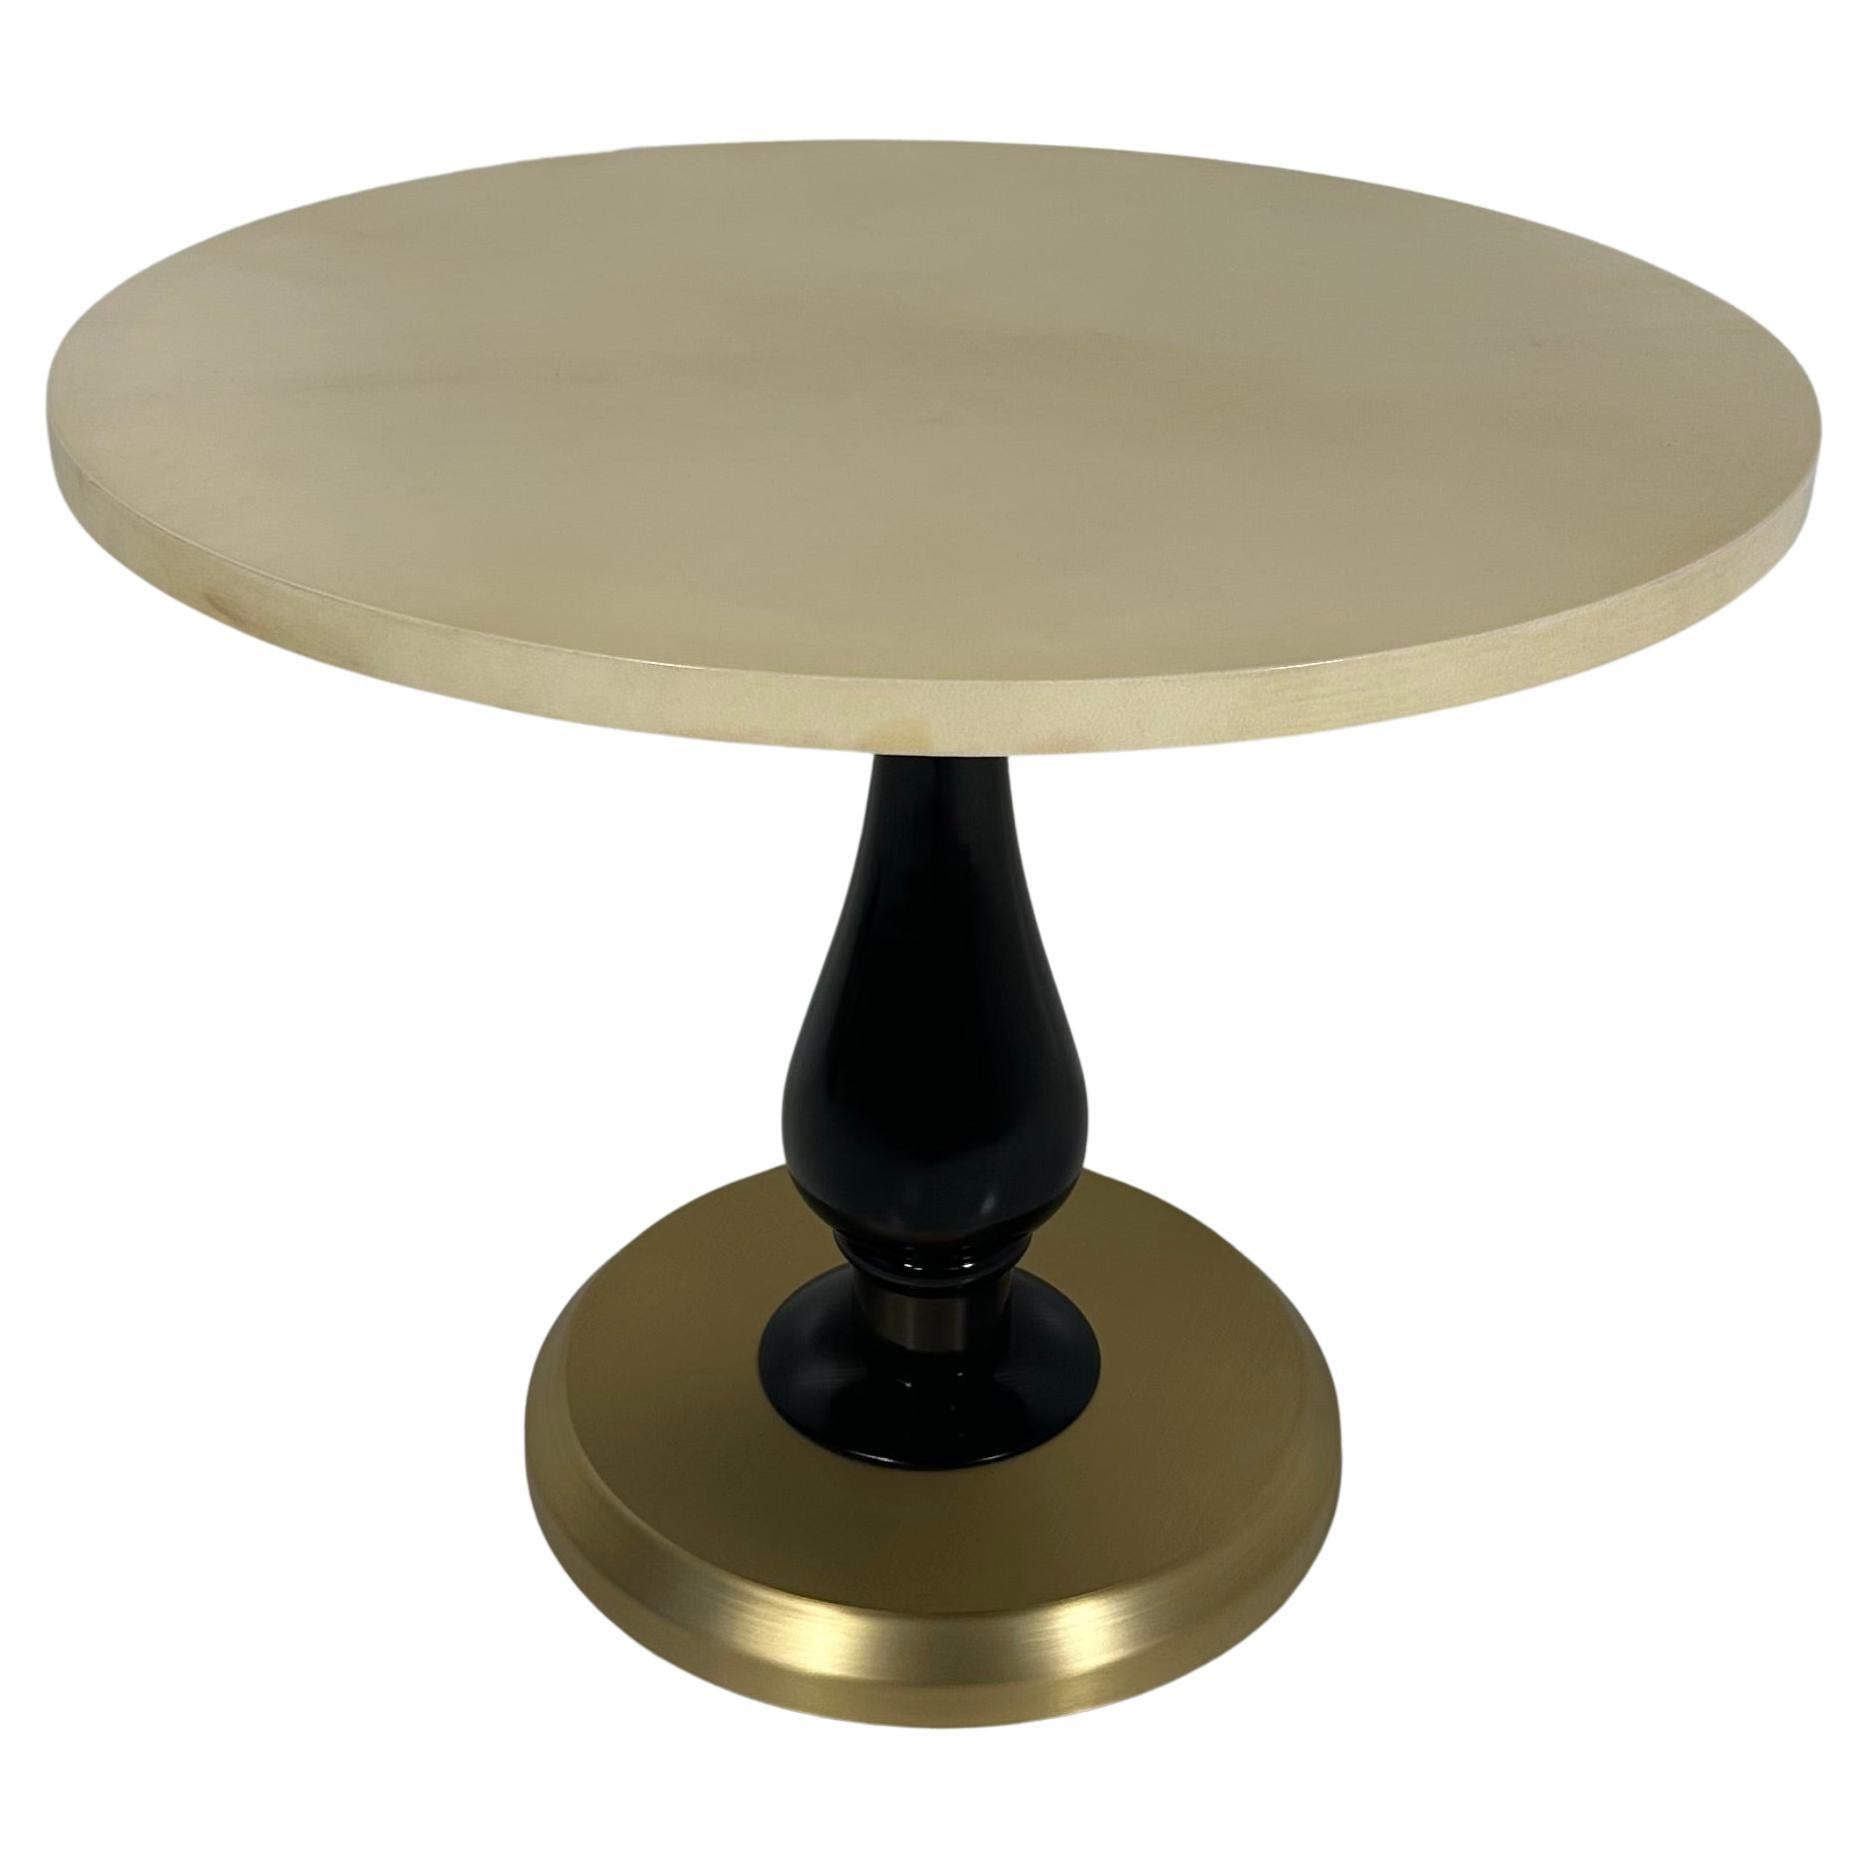 Italian Art Deco Style Parchment, Black Lacquer and Brass Coffee Table For Sale